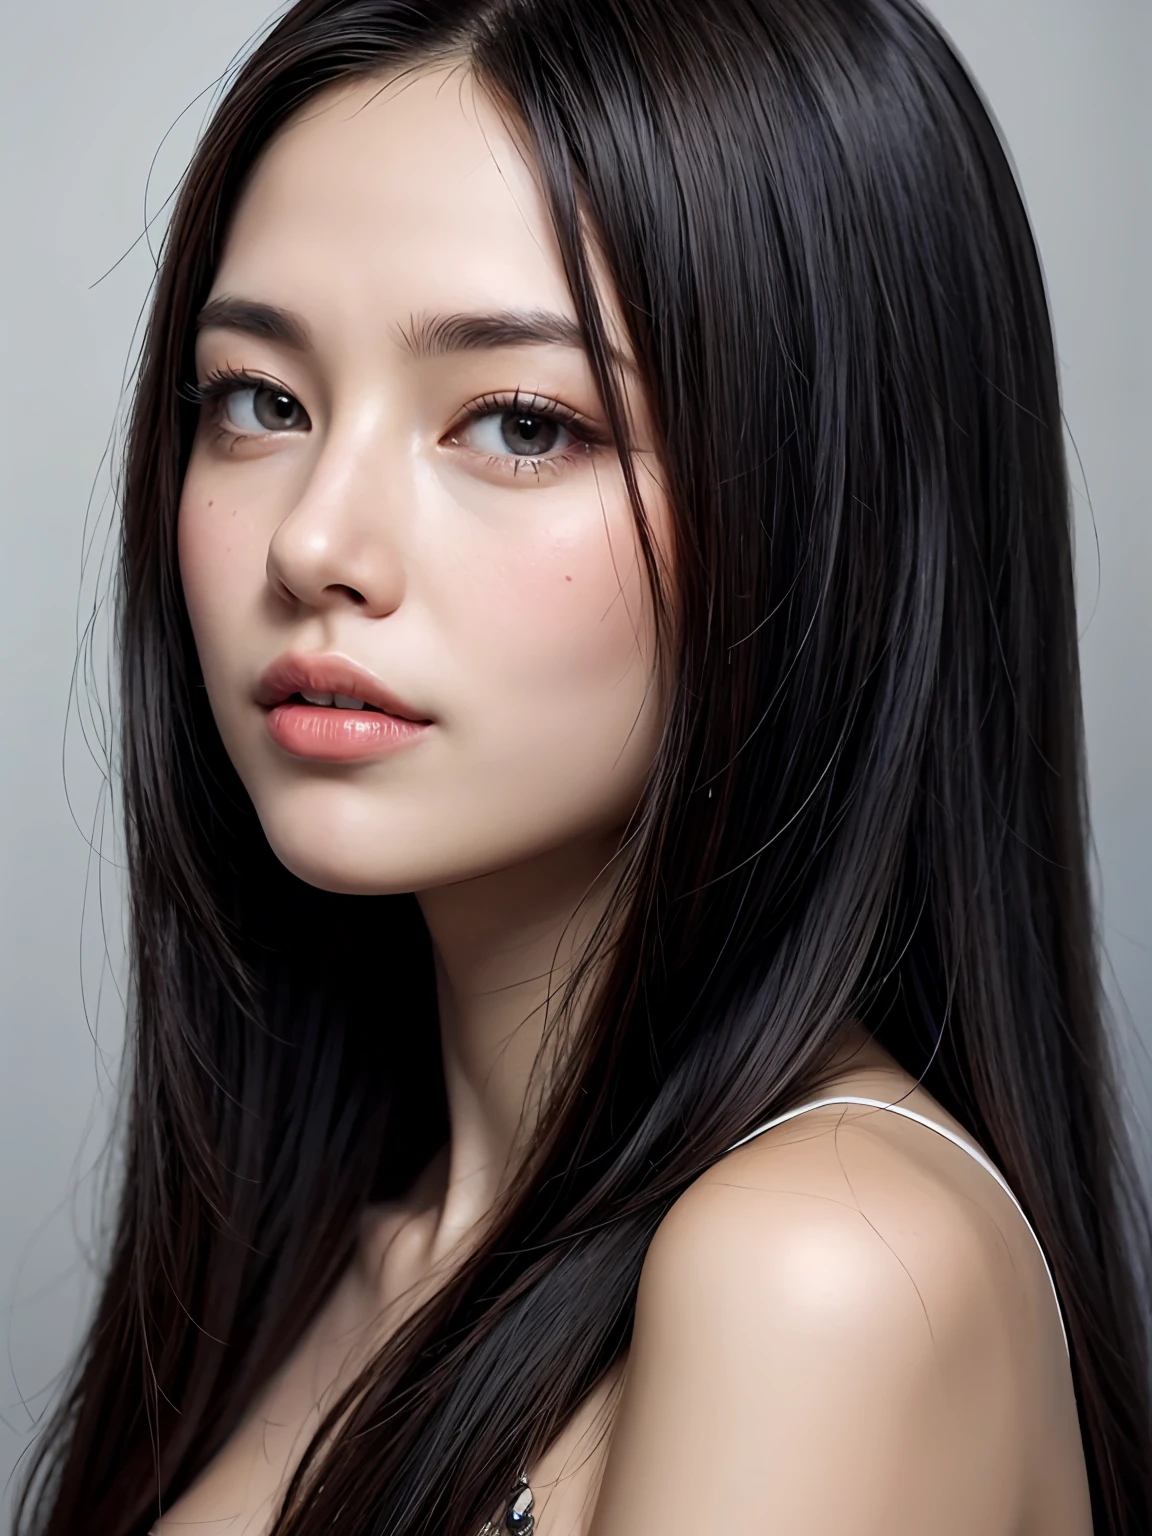 pureerosface_v1:0.24, Best Quality, Photorealistic, 8K, High Definition, 1 Girl, Look into the Beholder's Eyes, Long Hair, Black Hair